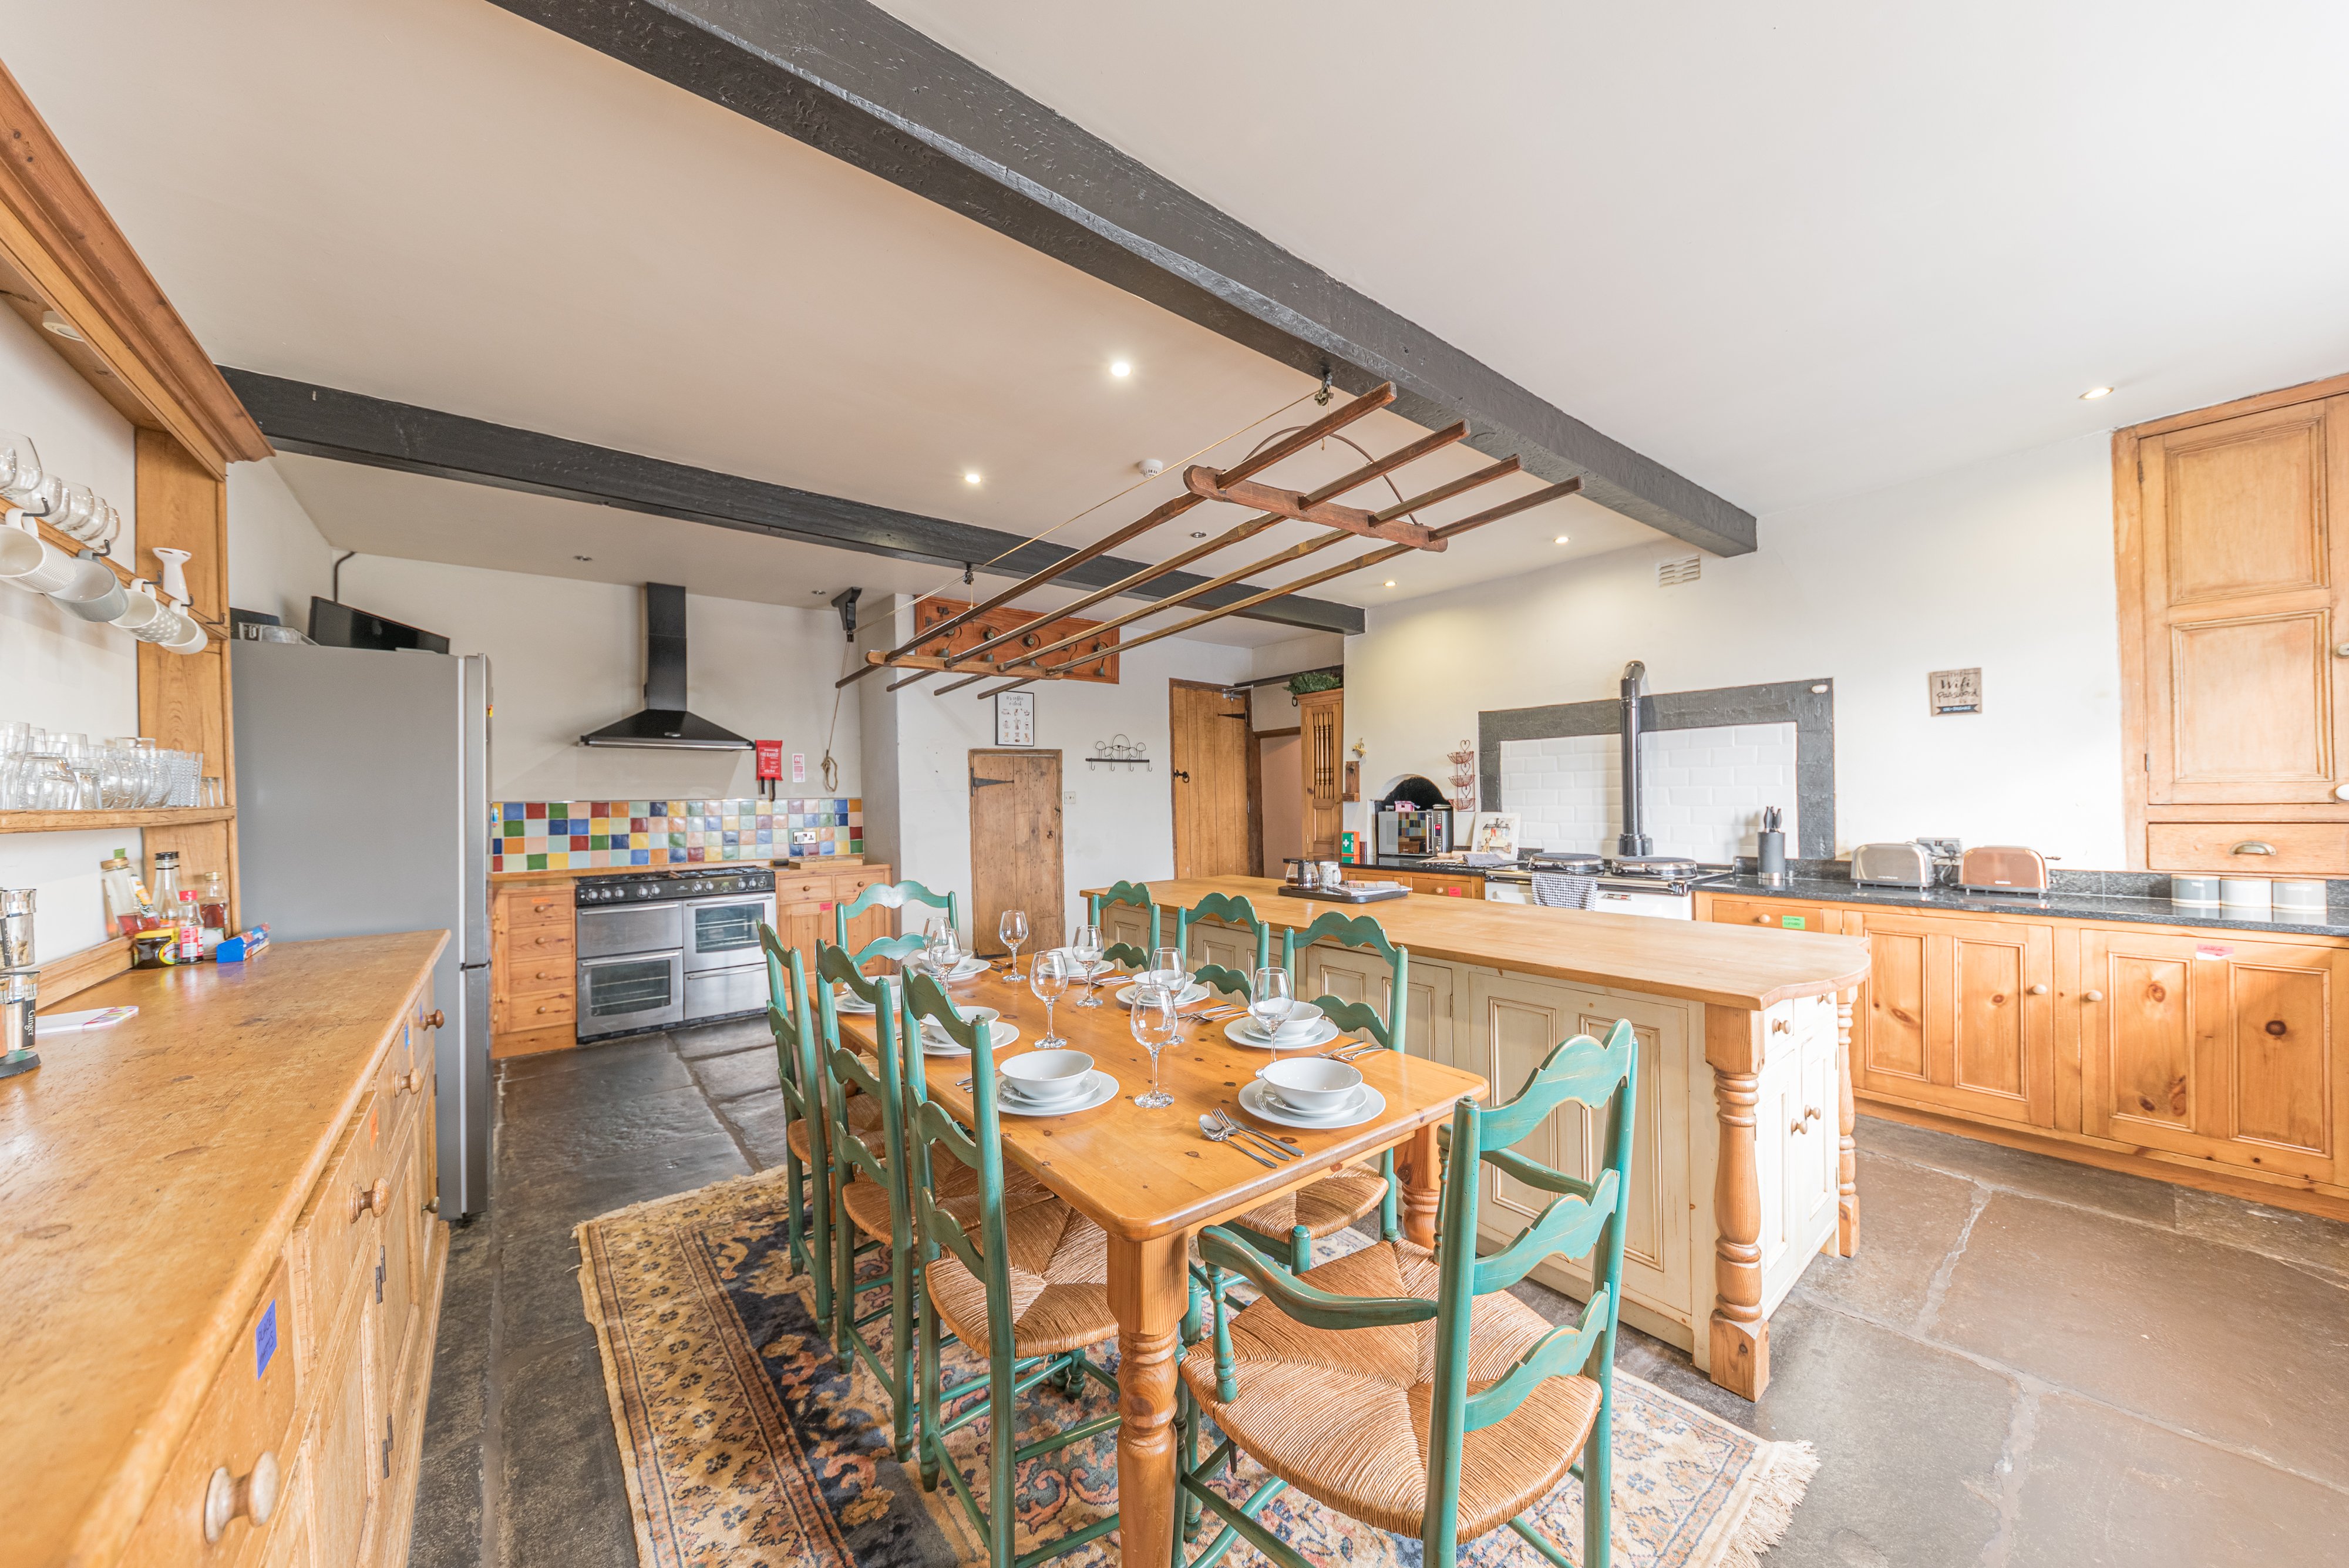 Abbey Farmhouse - stunning kitchen with dining table